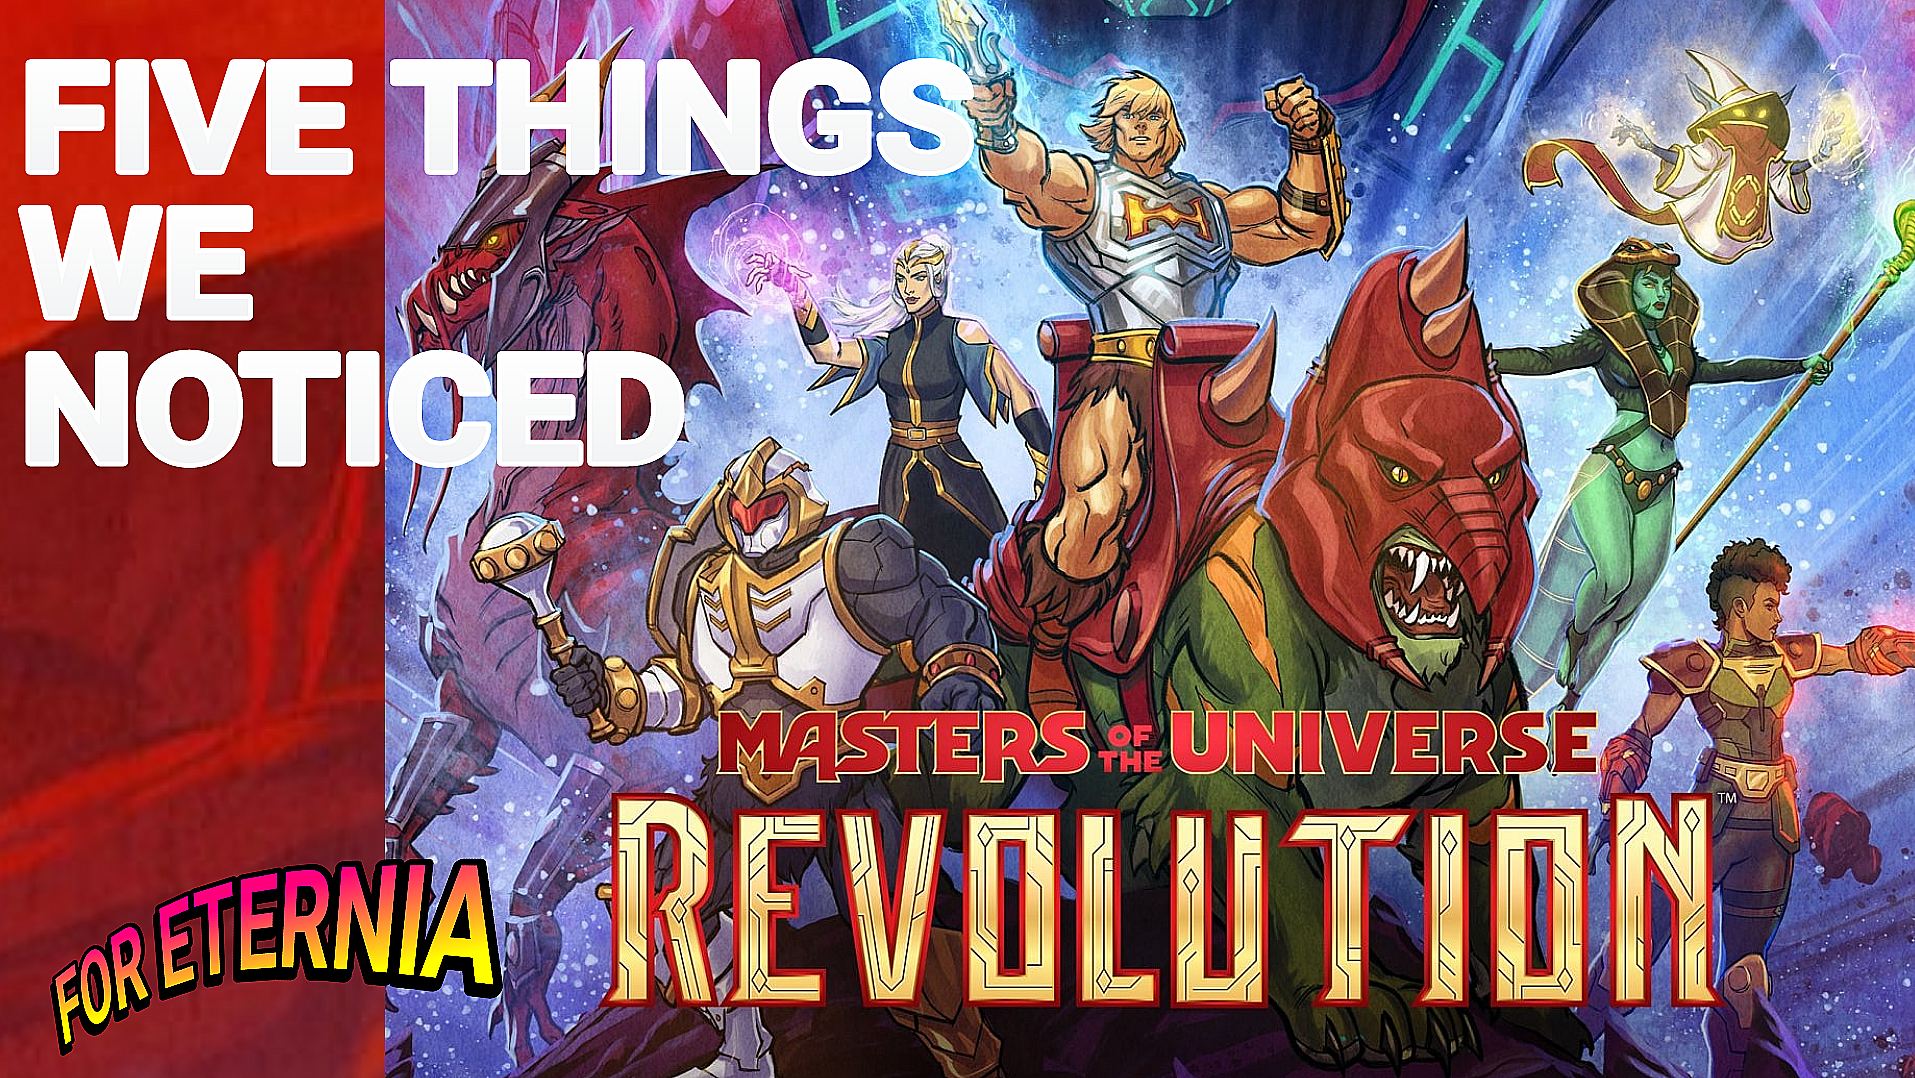 FIVE THINGS We Noticed in the New Poster for ”Masters of the Universe: Revolution”